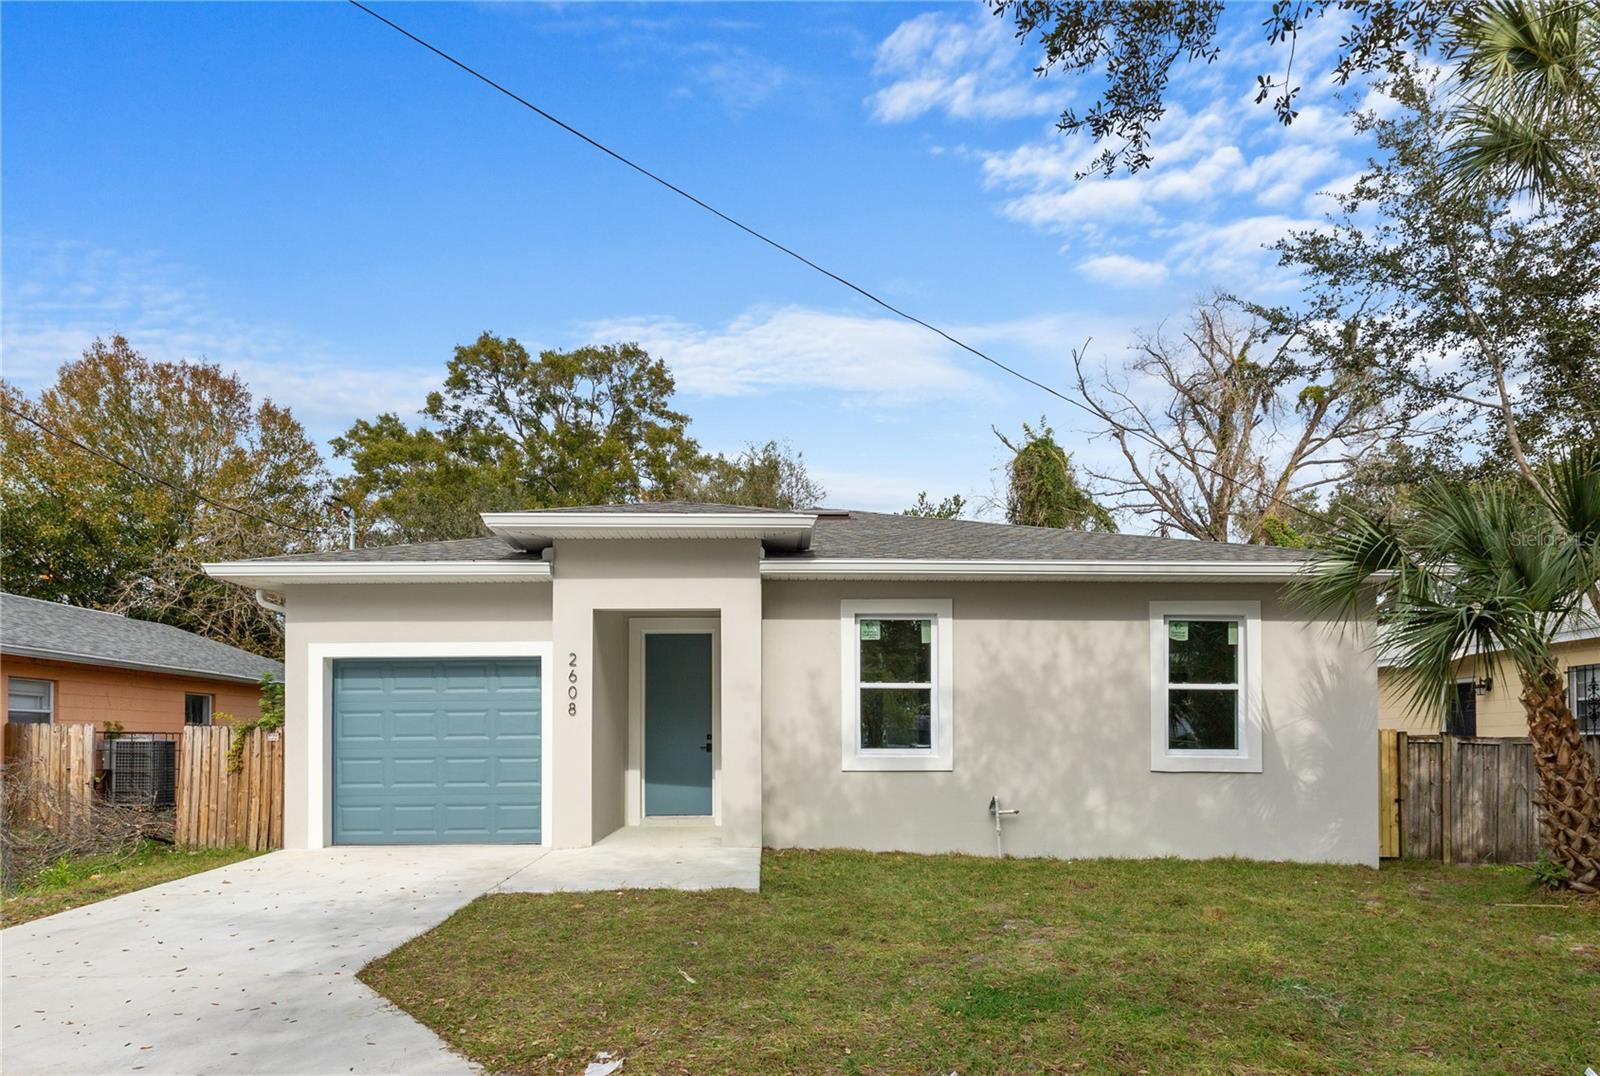 Photo one of 2608 E Lake Ave Tampa FL 33610 | MLS T3503061